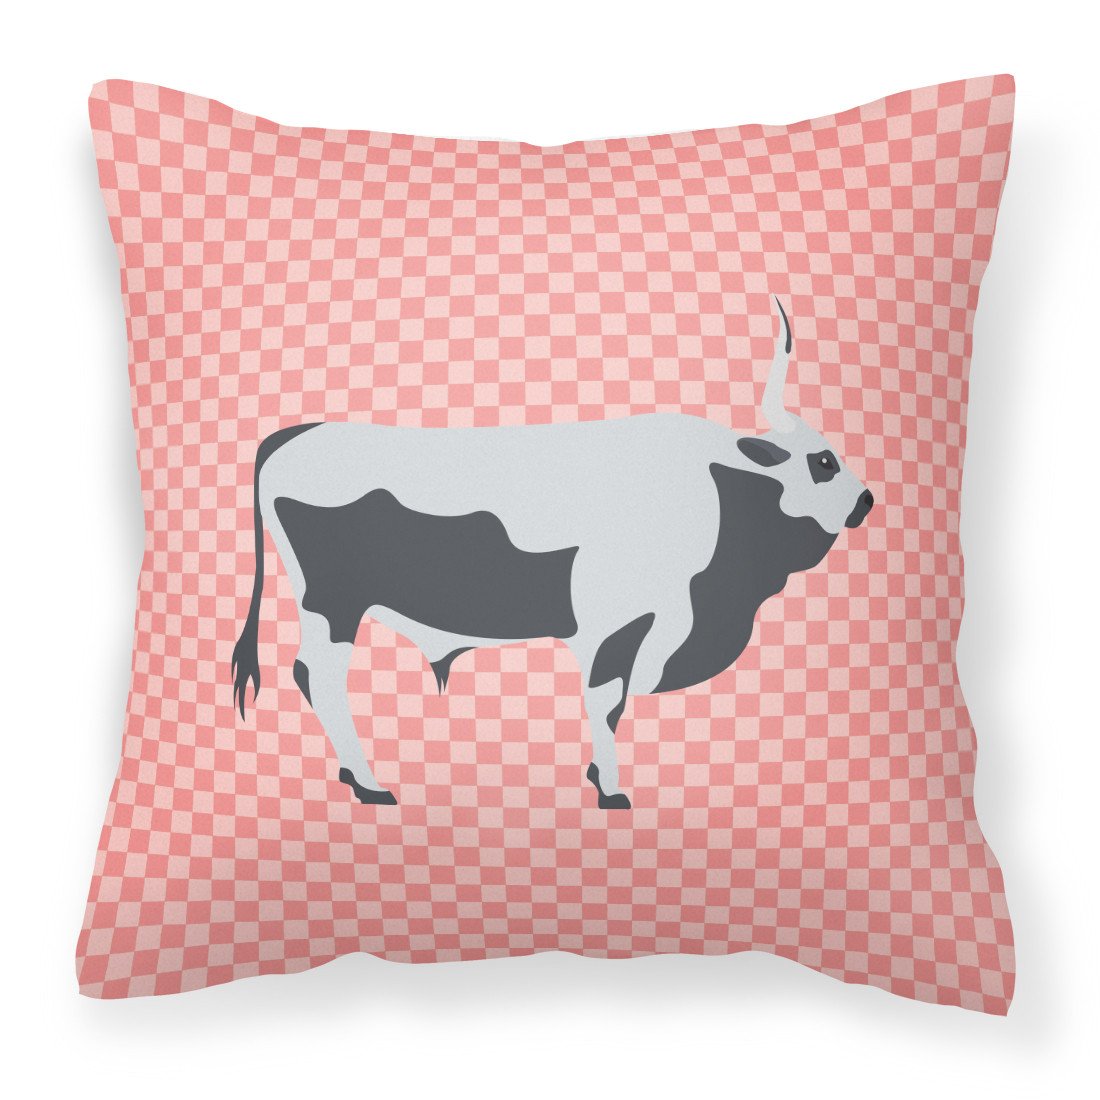 Hungarian Grey Steppe Cow Pink Check Fabric Decorative Pillow BB7824PW1818 by Caroline's Treasures